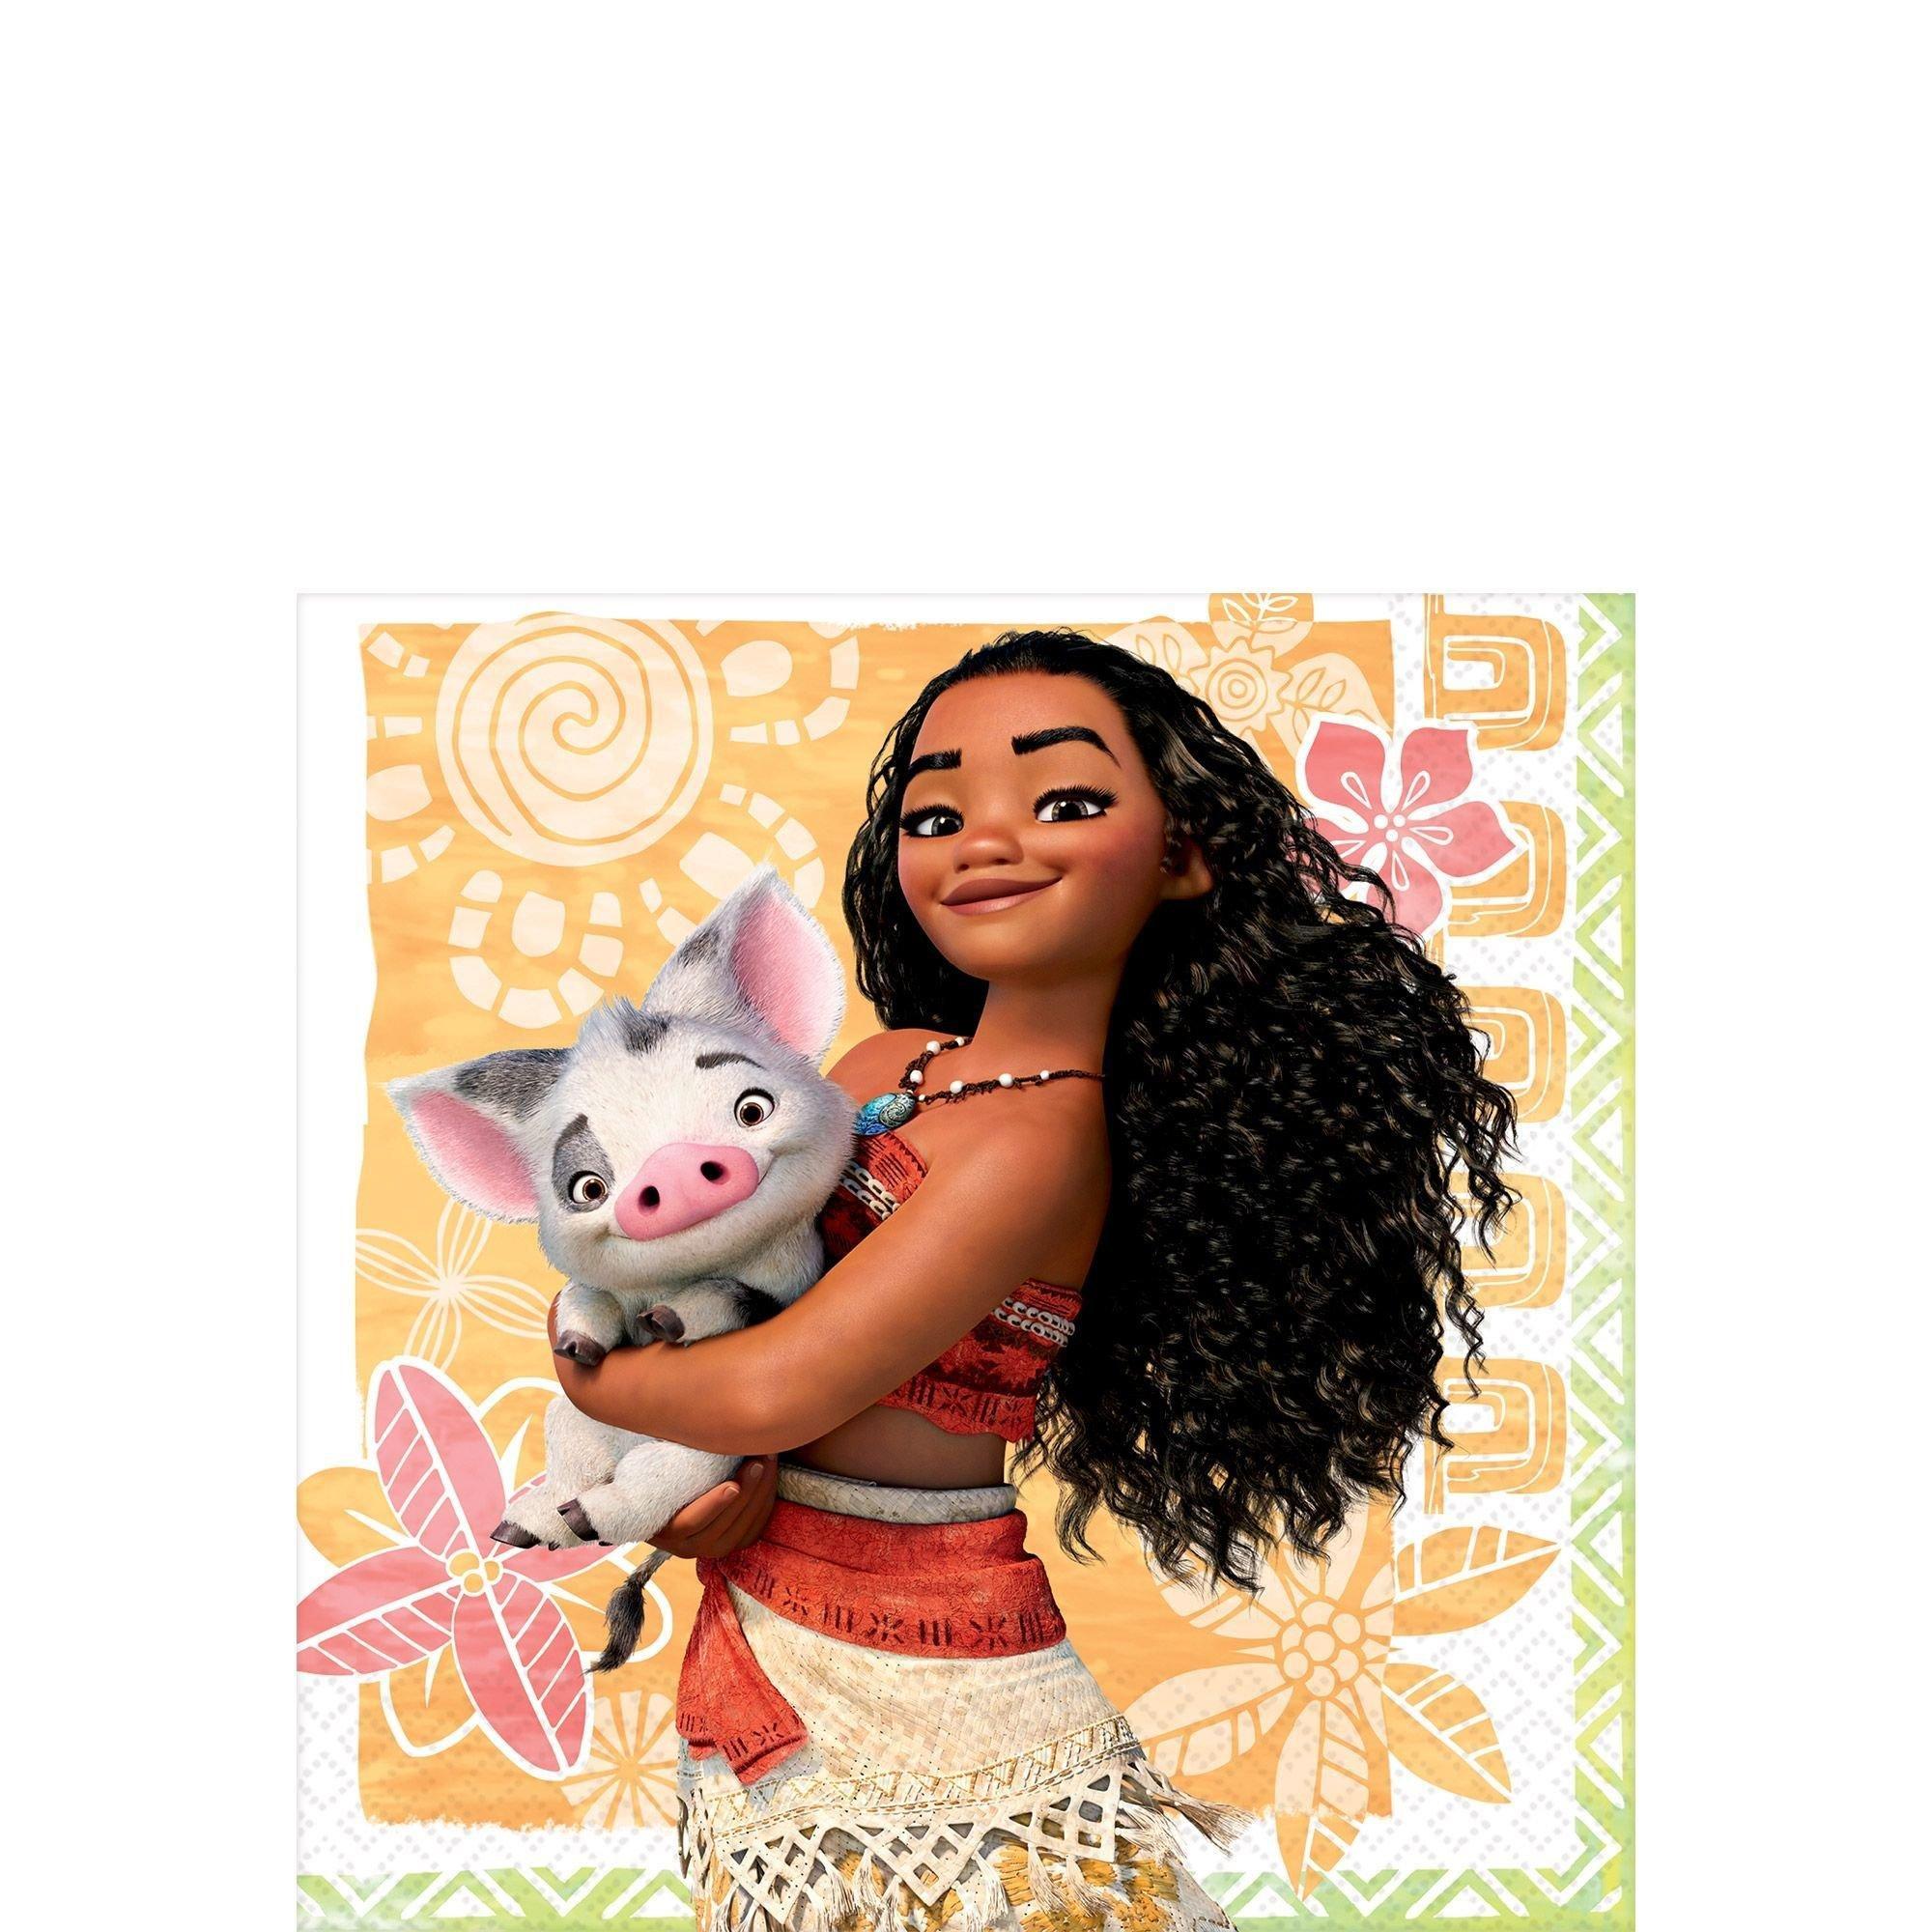 Trendy And Unique party decorations moana Designs On Offers 